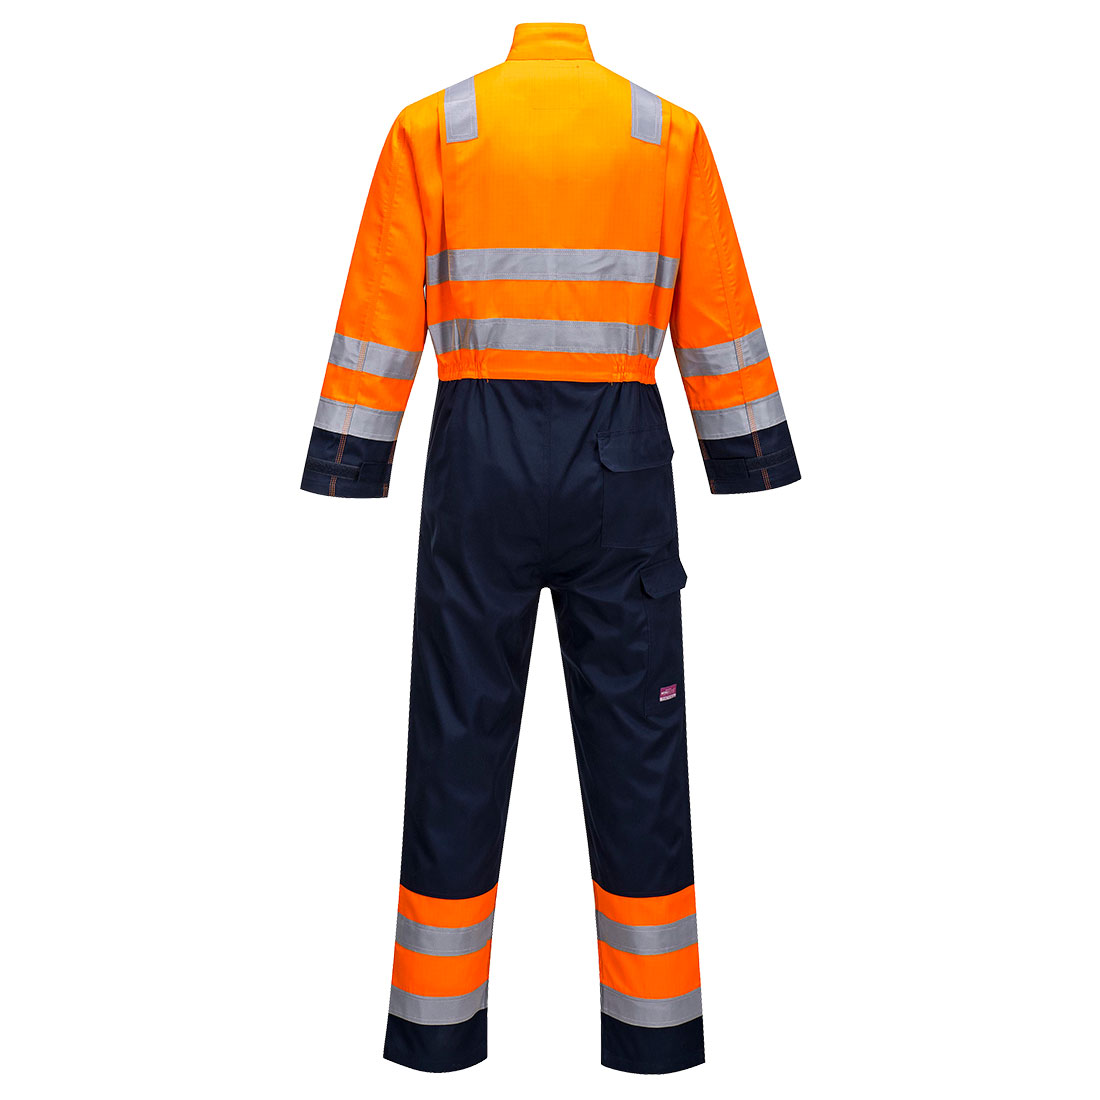 Heavy Duty Multi-Risk Modaflame Flame Resistant RIS Coverall